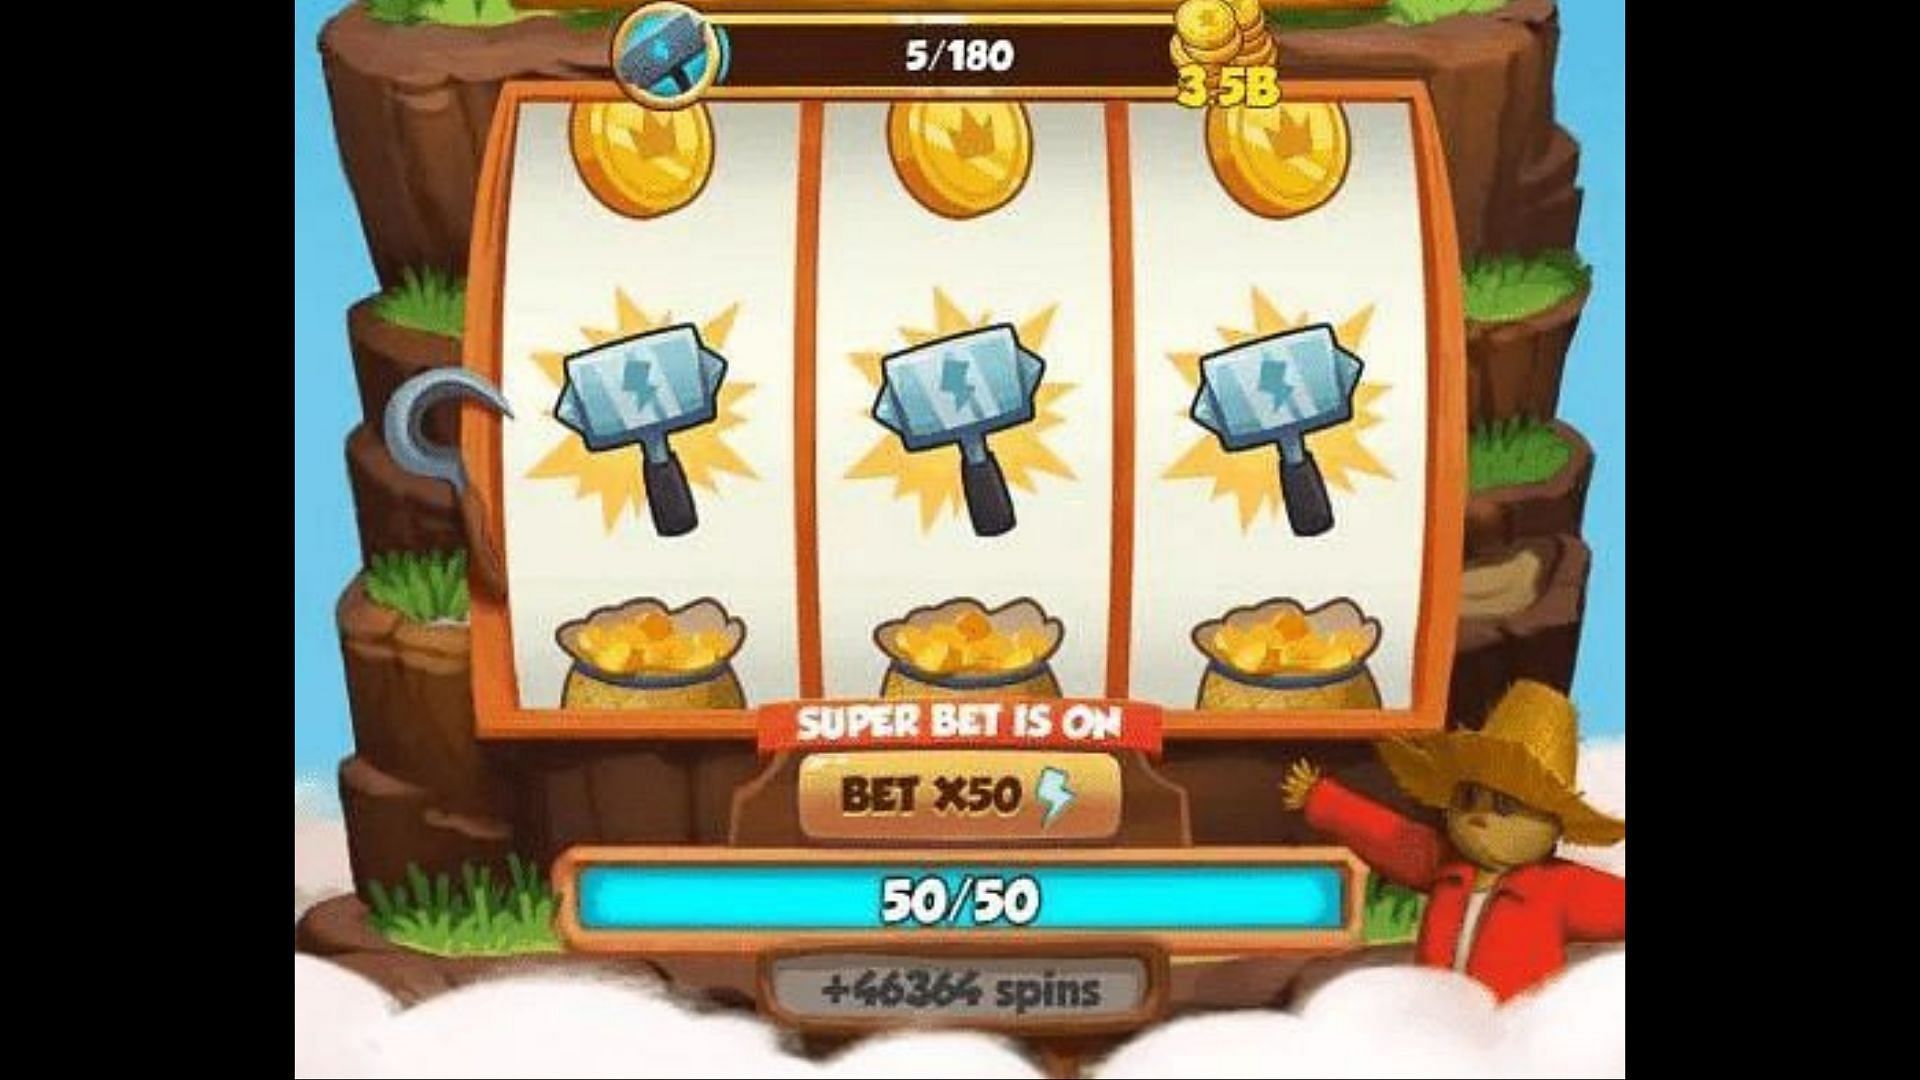 Conserving spins will allow players to win significant rewards whenever they use the spins (Image via Coin Master Guru)